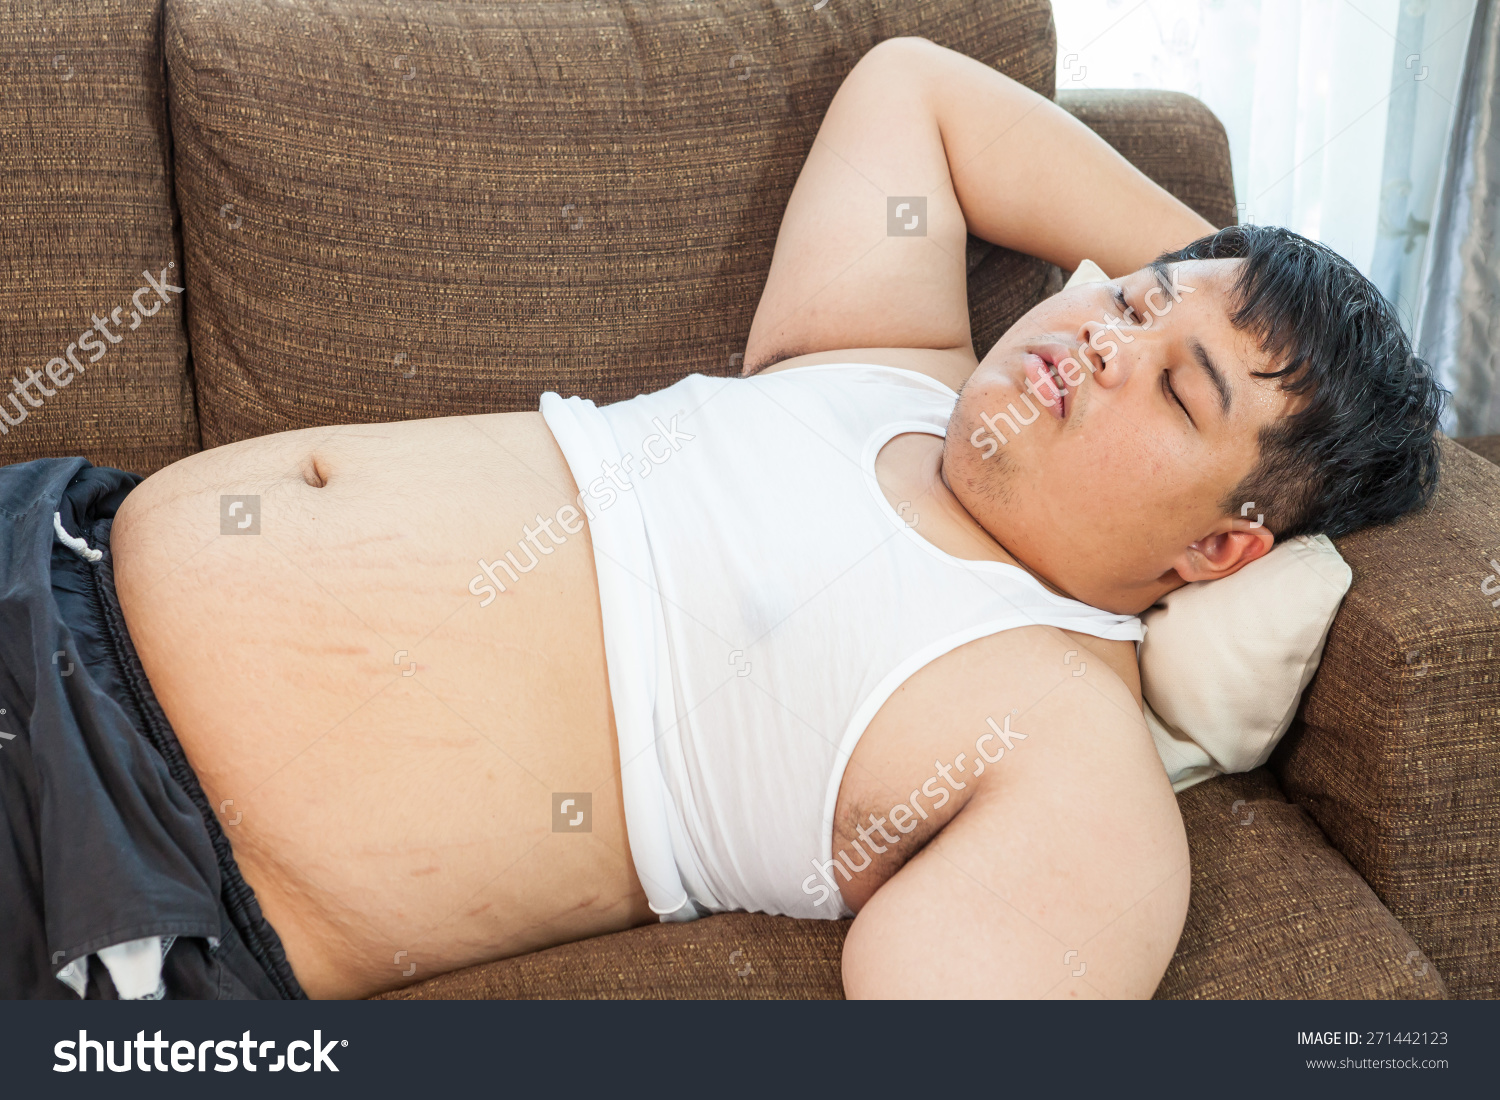 stock-photo-fat-asian-man-sleeping-on-the-couch-271442123.jpg